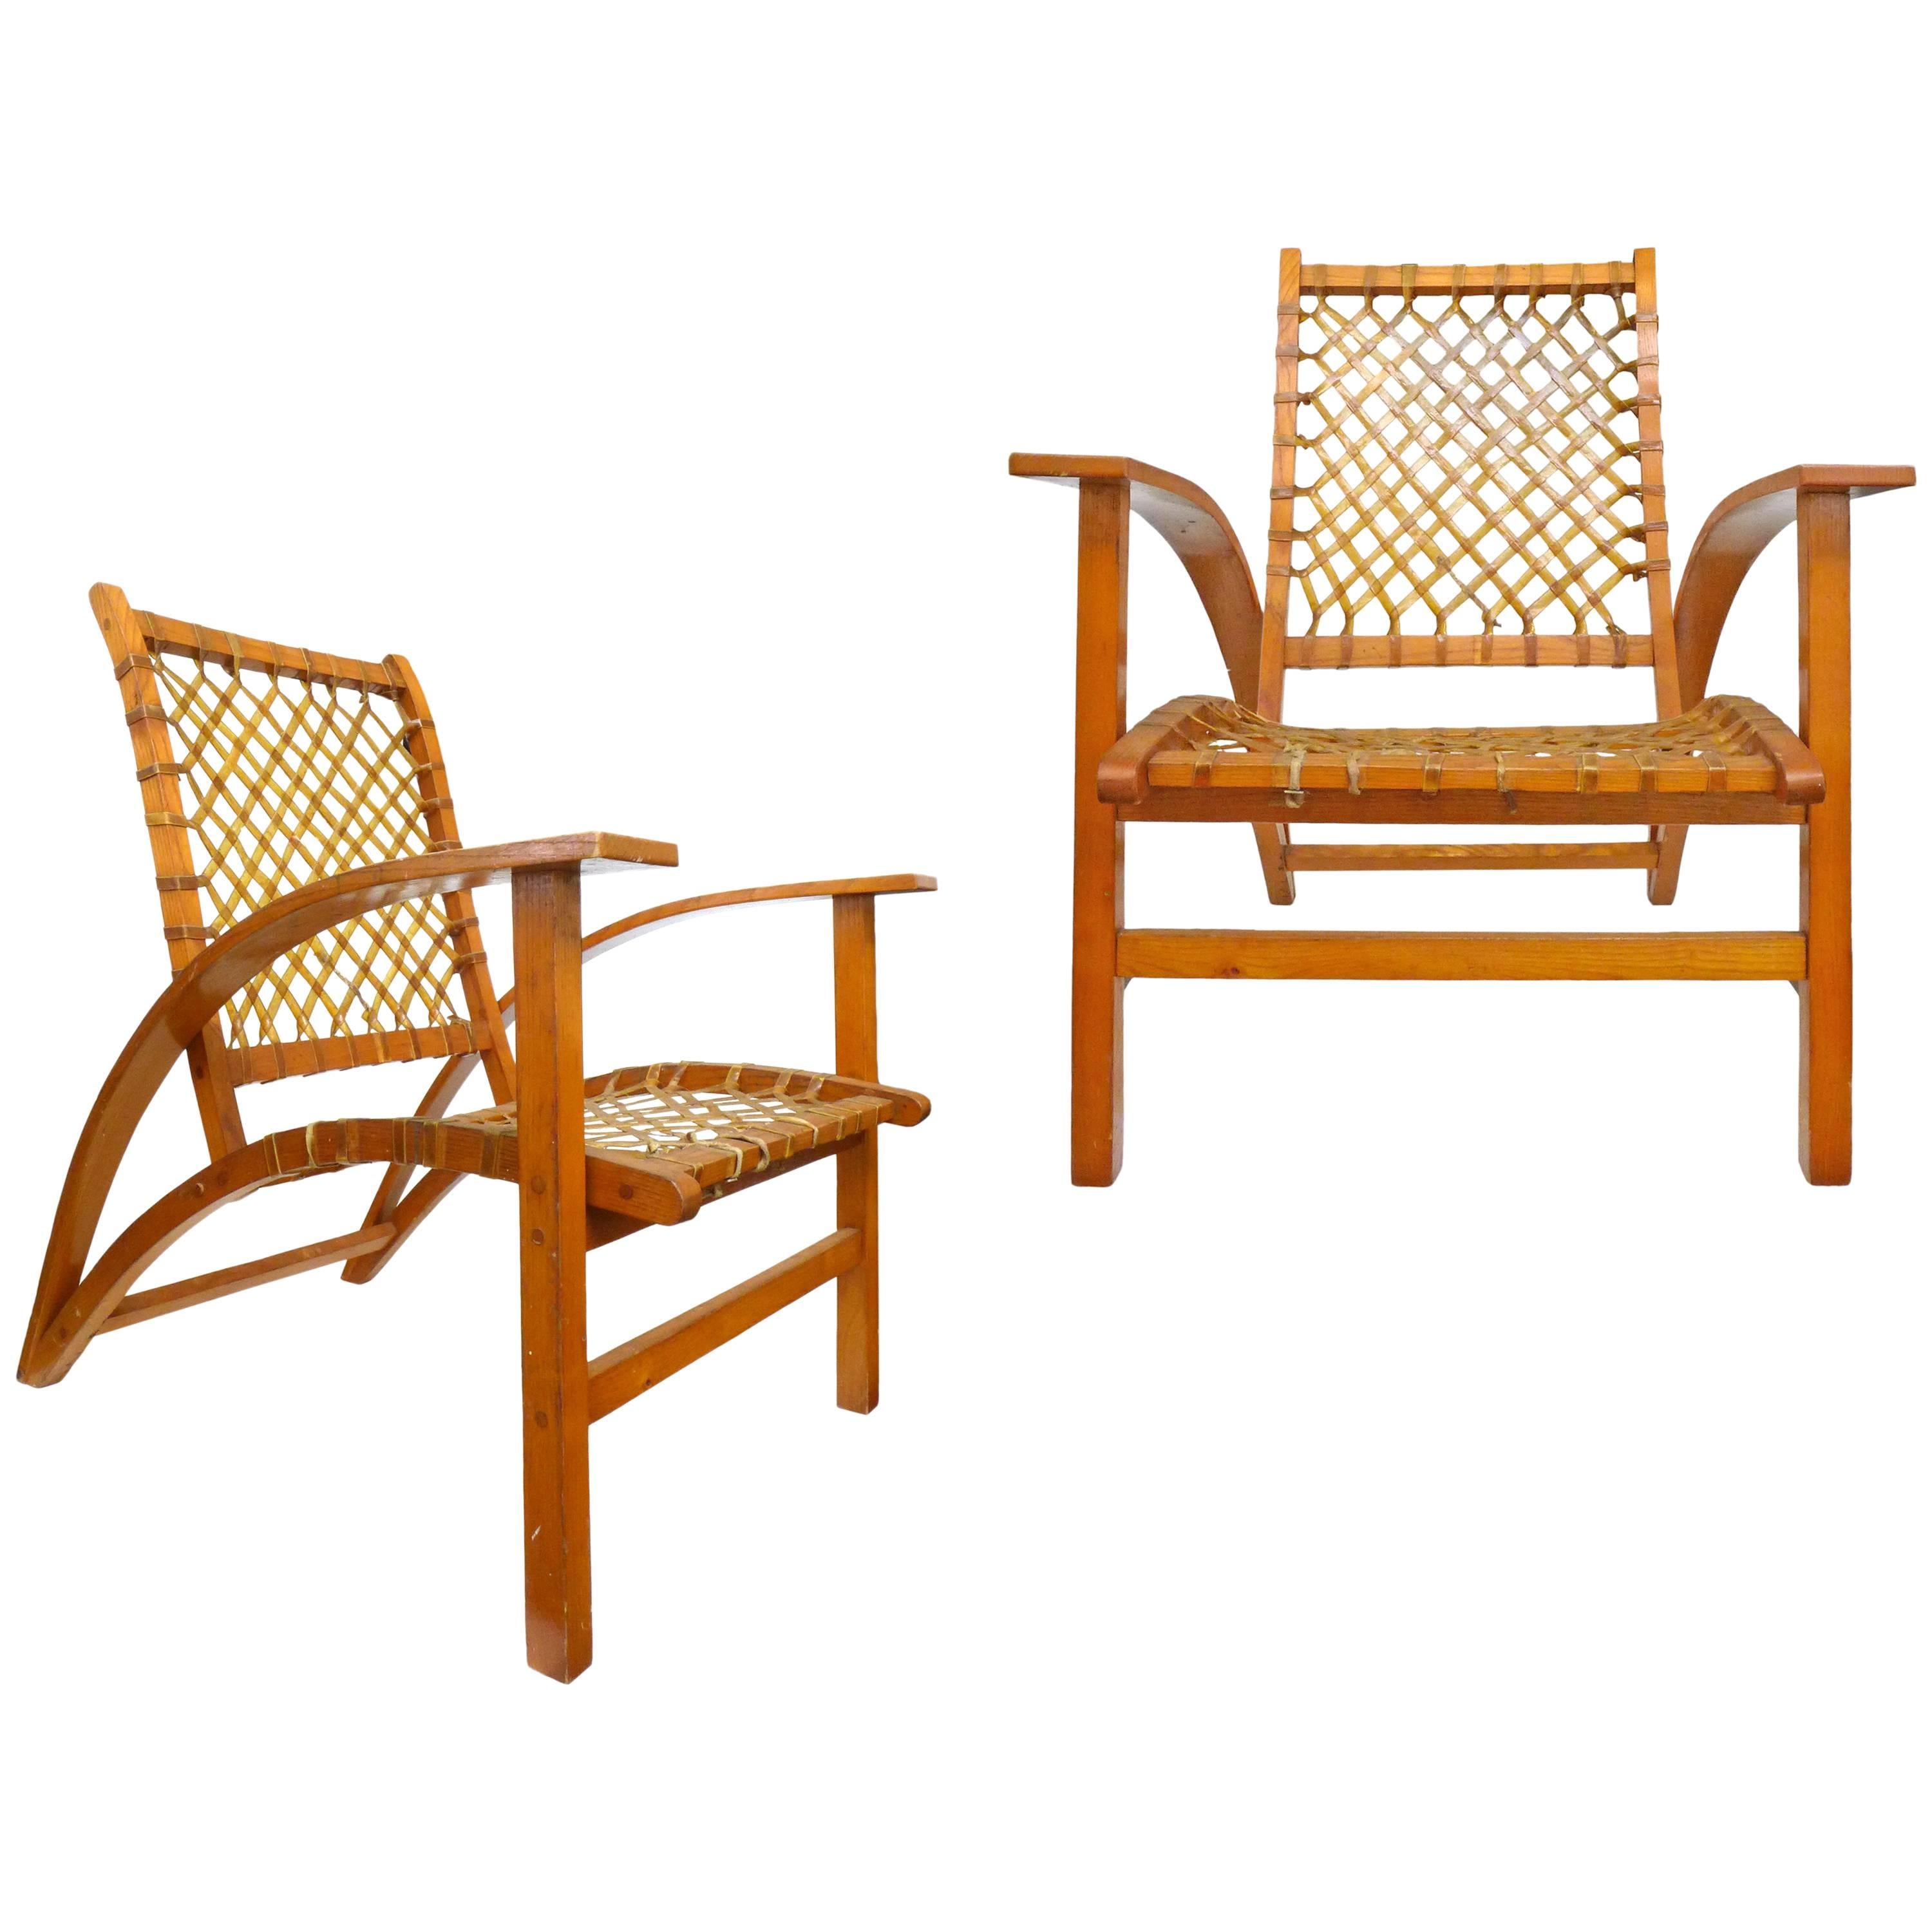 Pair of "Sno-Shu" Chairs by Carl Koch for Vermont Tubbs, Inc